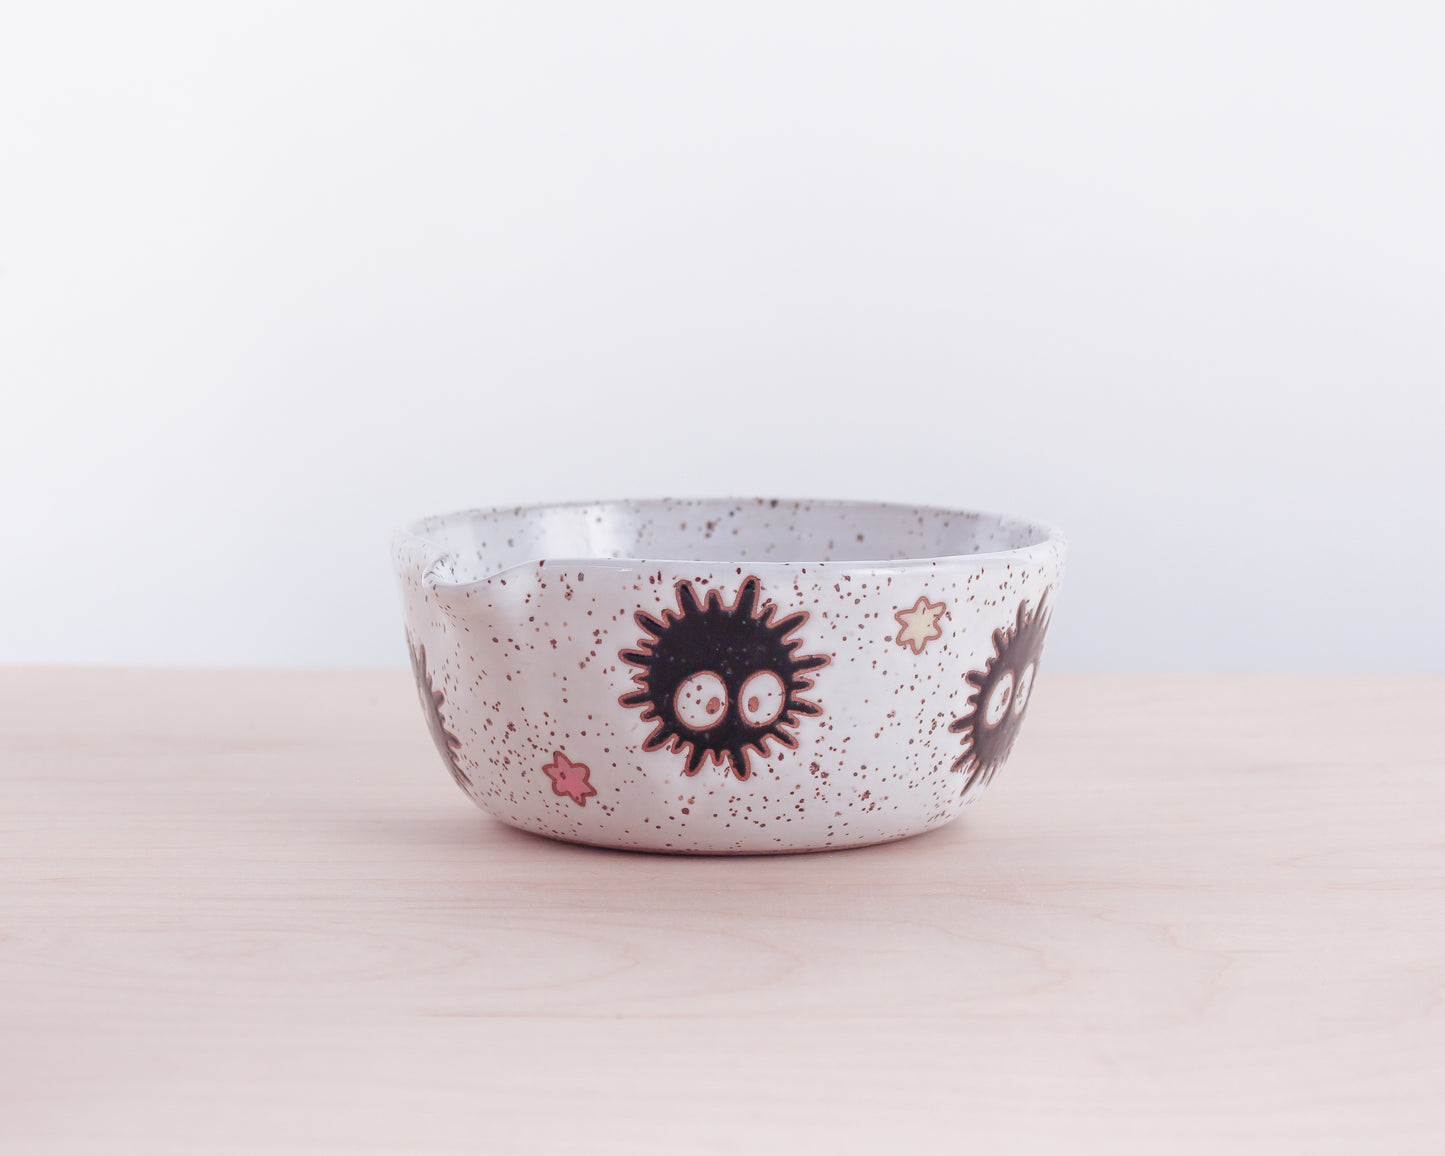 Soot Sprite Spouted Bowl